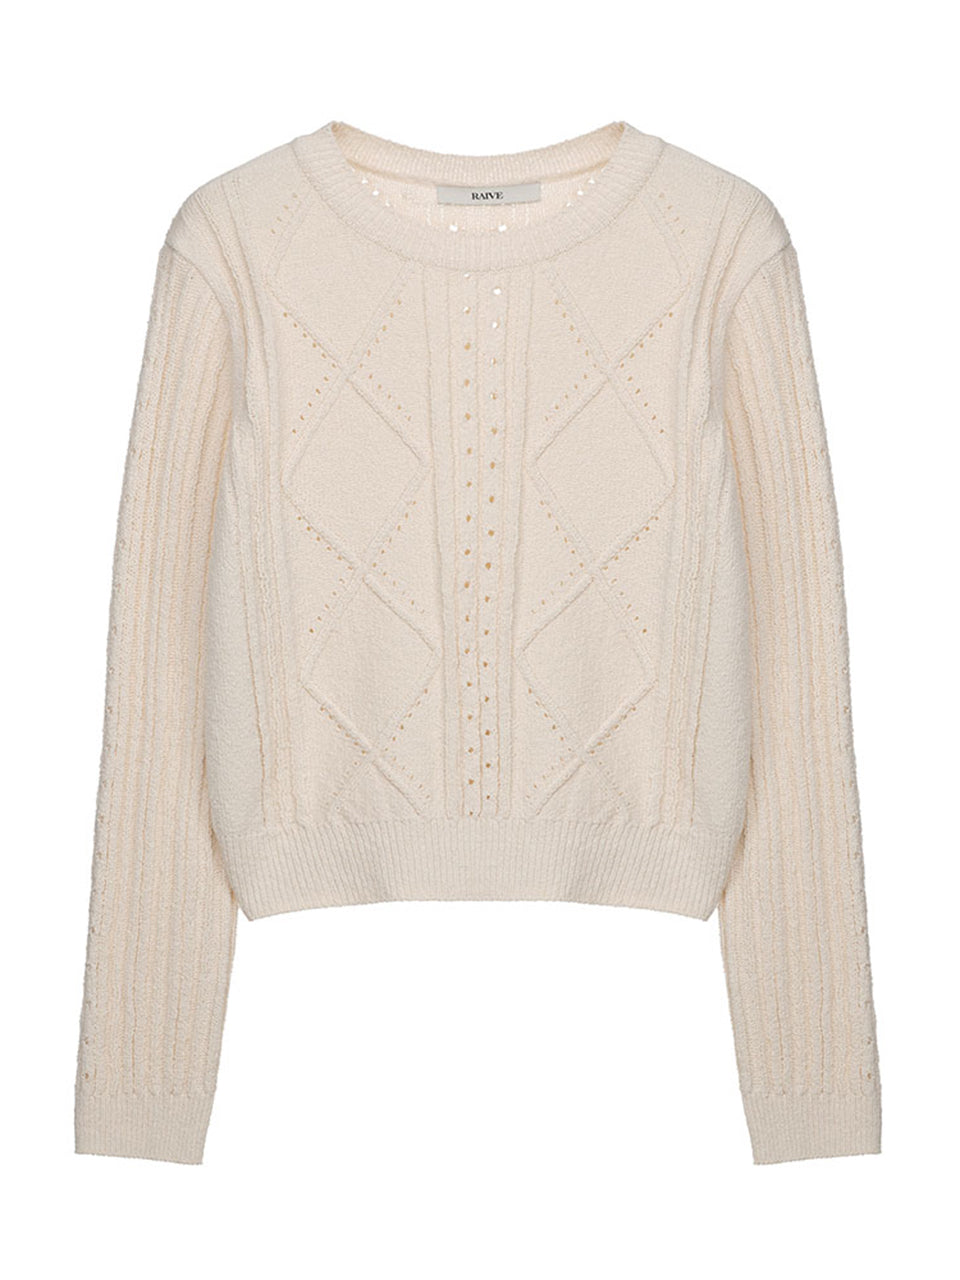 Mesh Crop Knit in Ivory